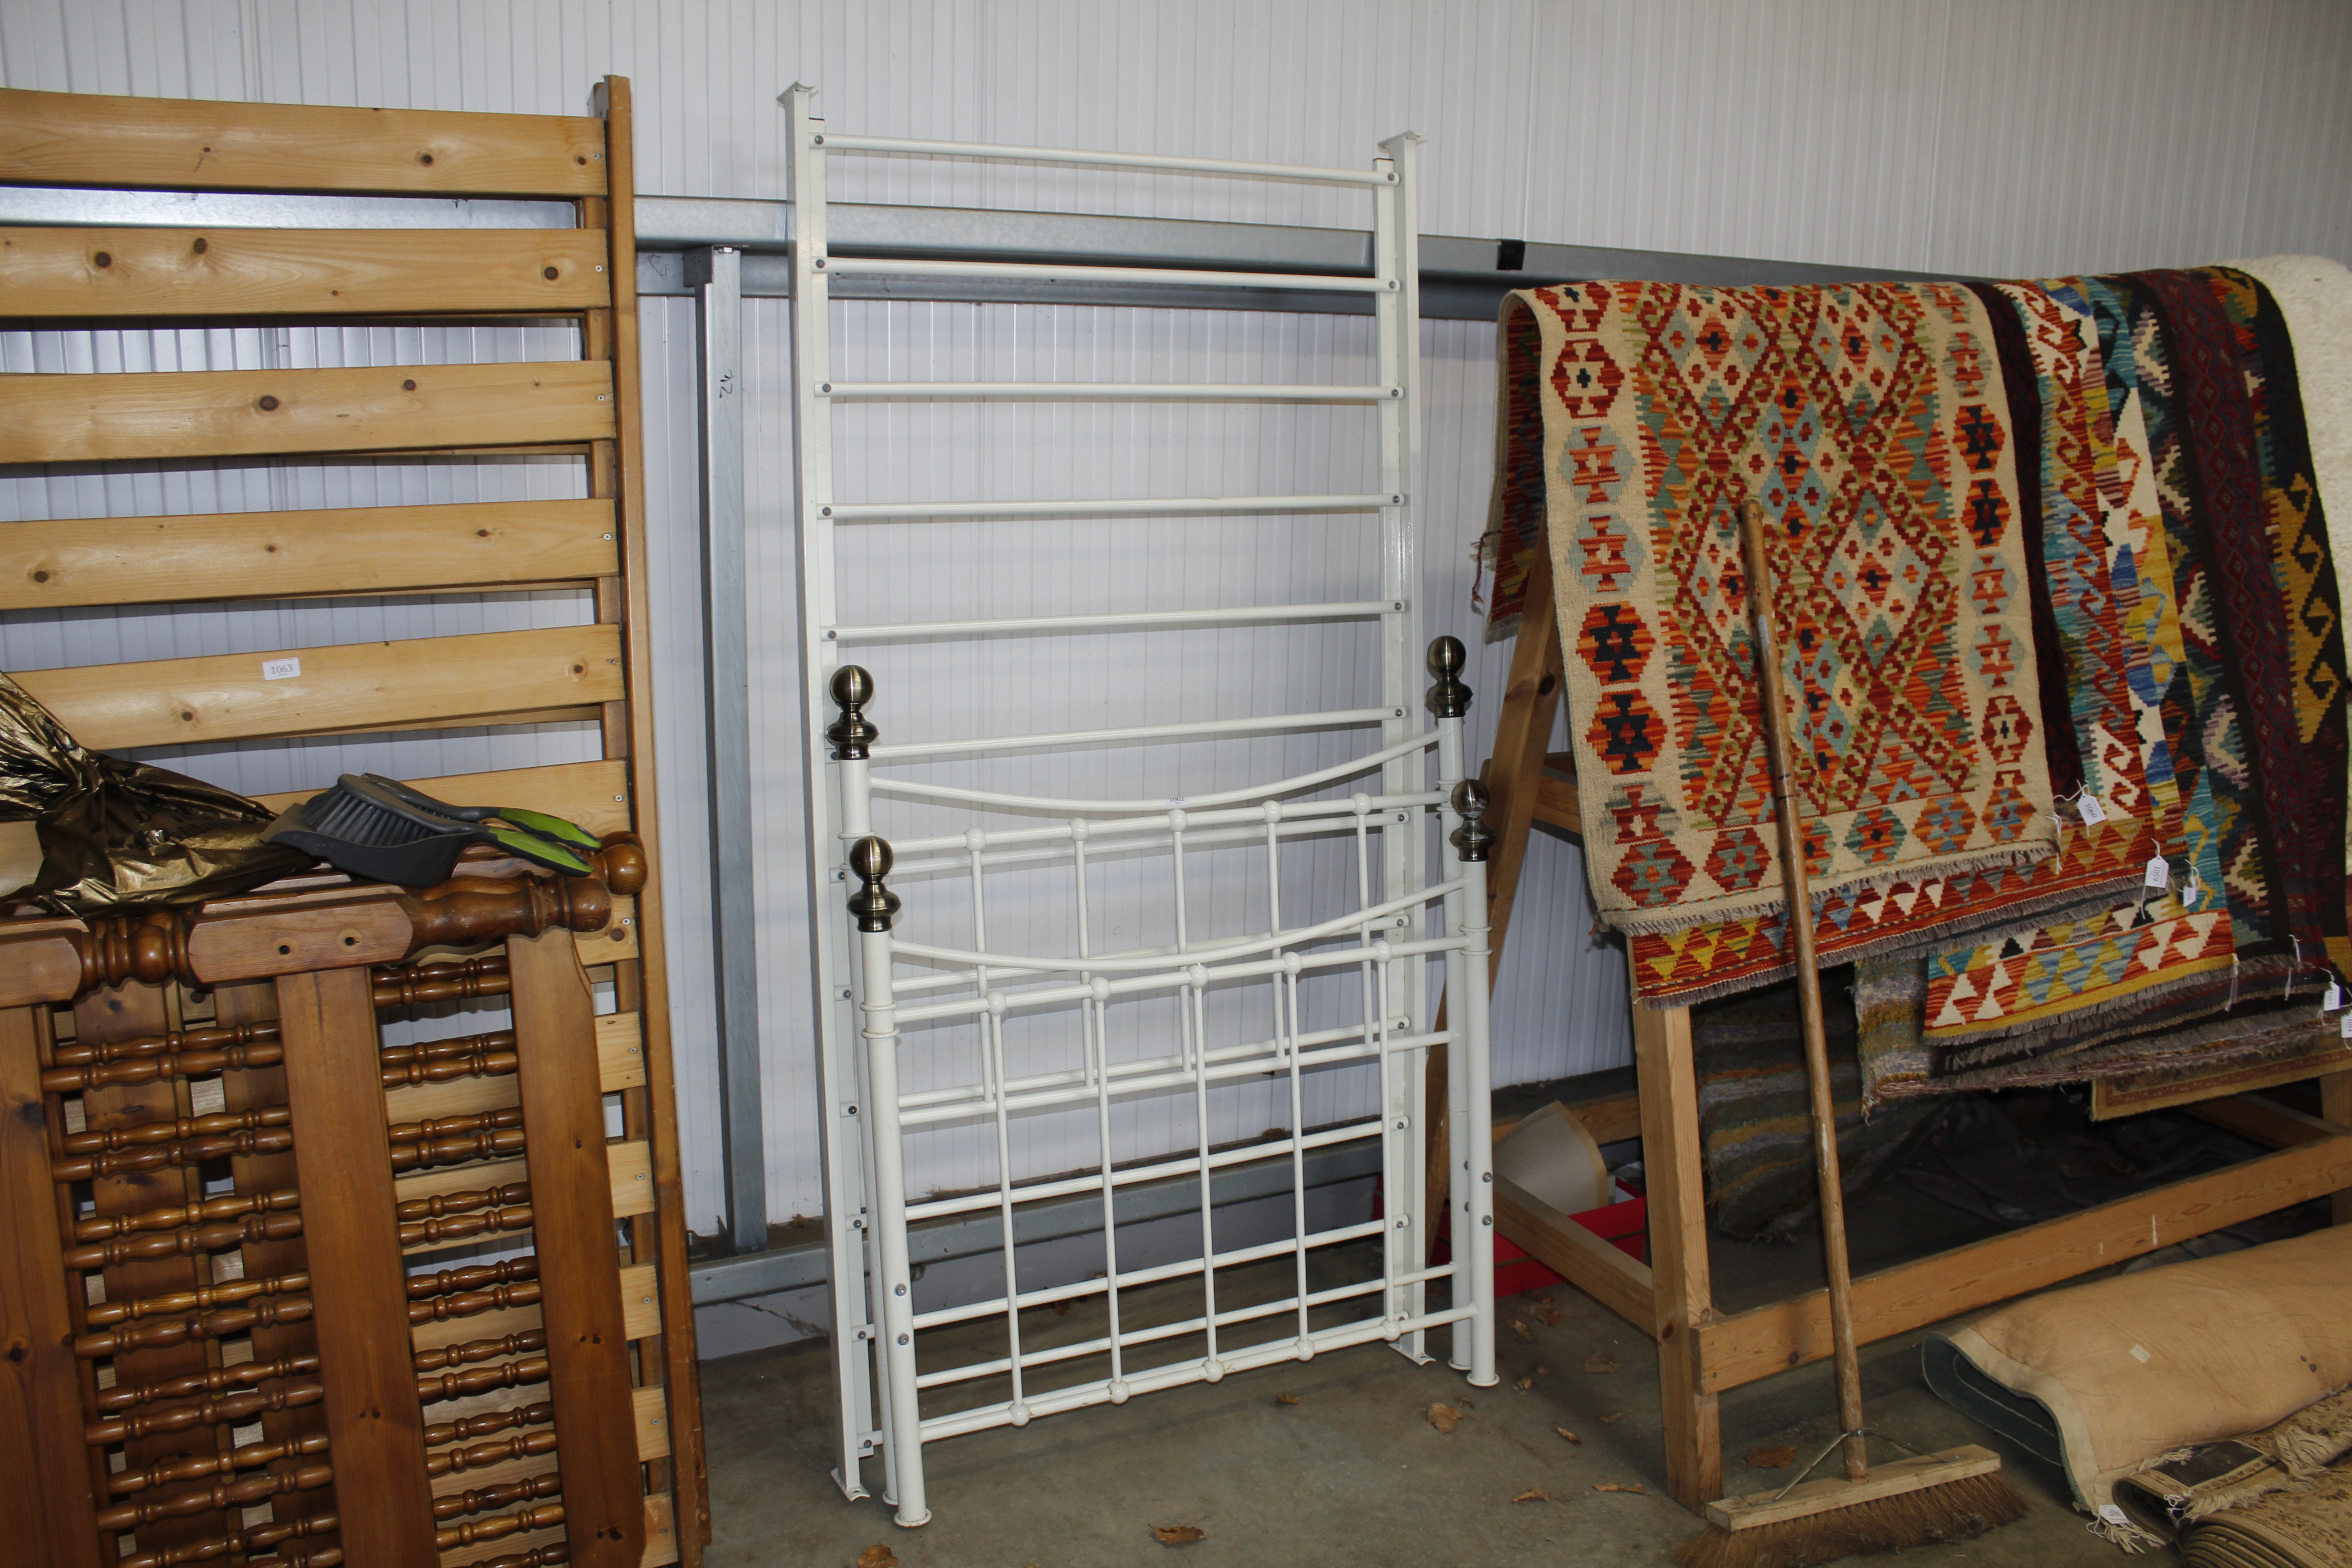 A metal single bed frame